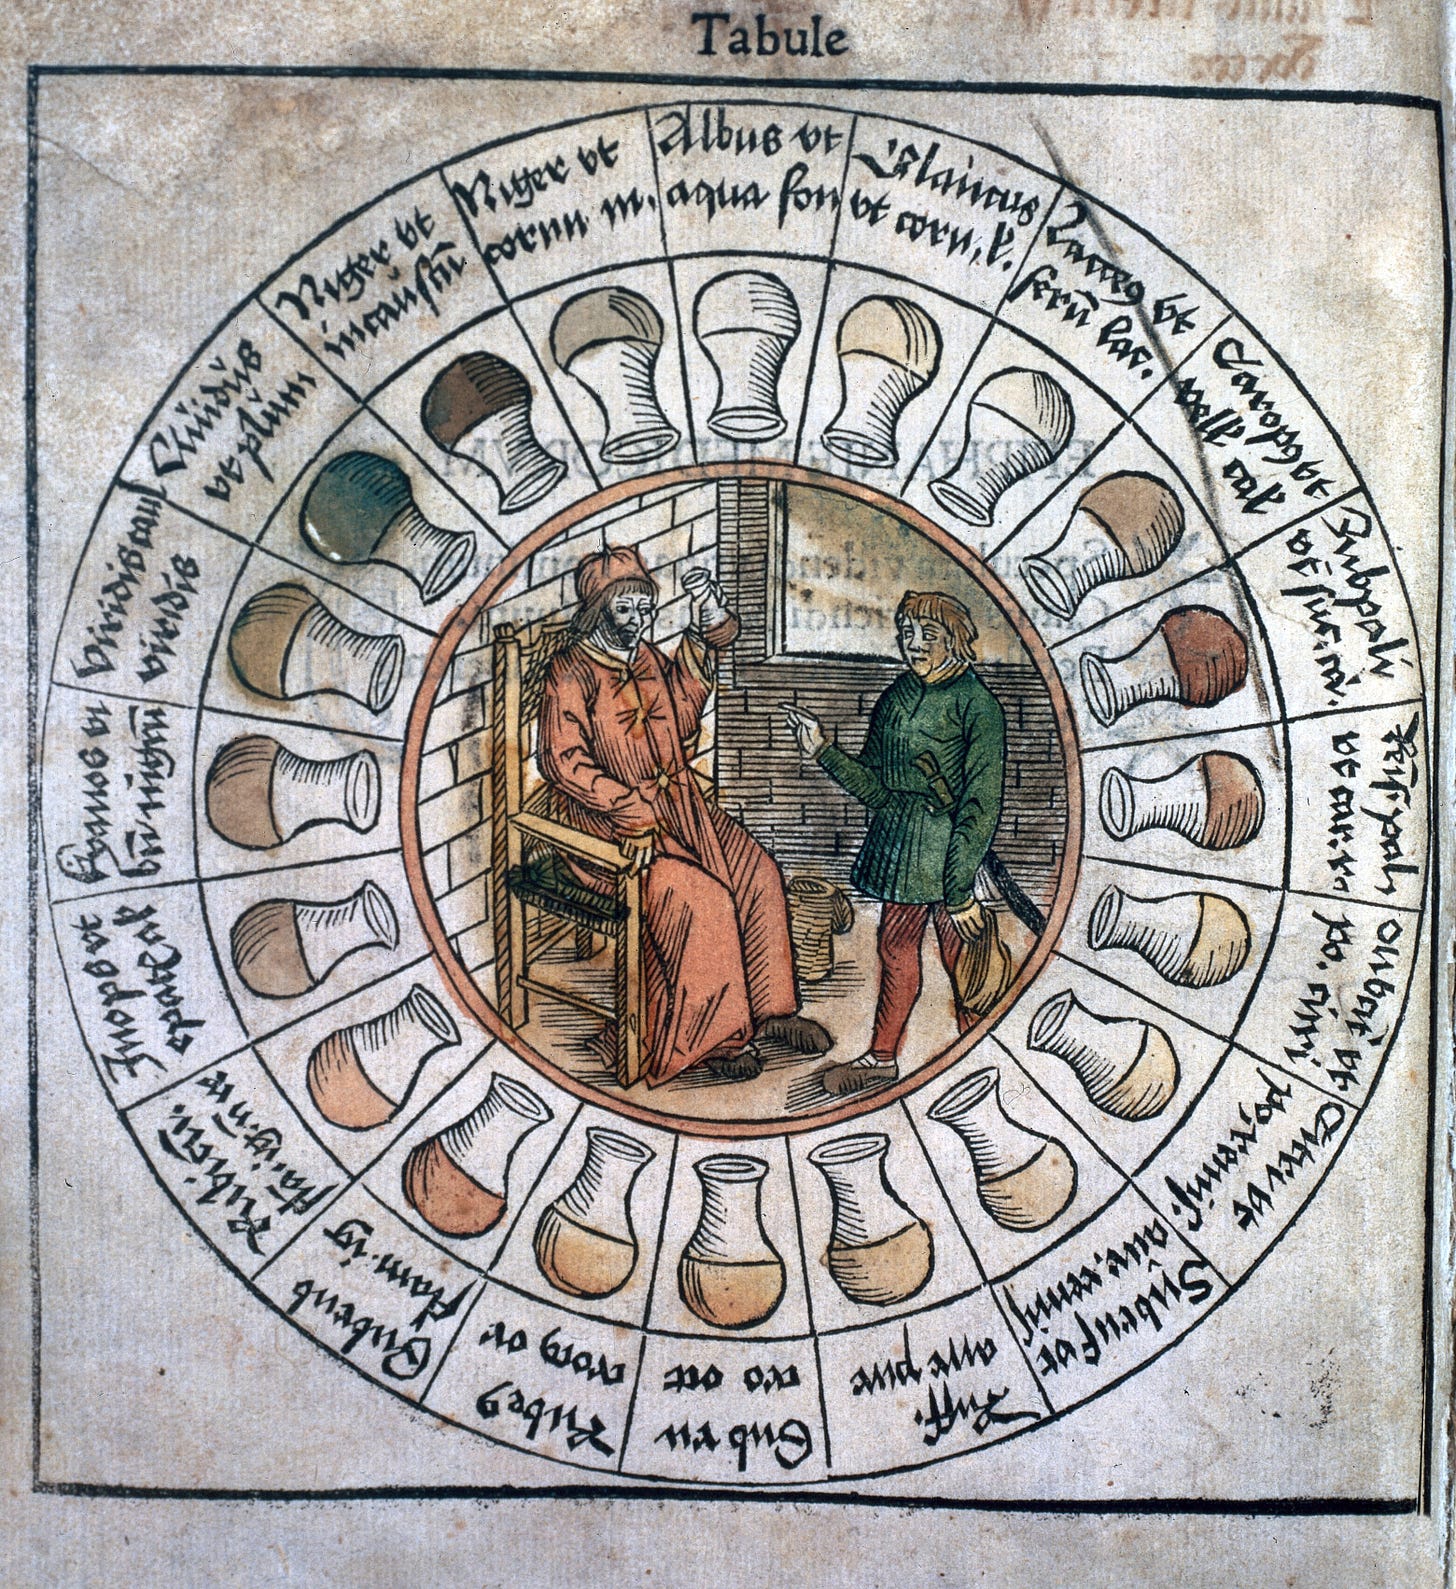 This illustration has a central circular element where a seated doctor examines a urine bottle and a man awaits his verdict. Around this is a larger circle divided into sections, each showing a drawing of a urine bottle with different coloured contents. A further ring of the circle contains Latin text referring to each bottle.